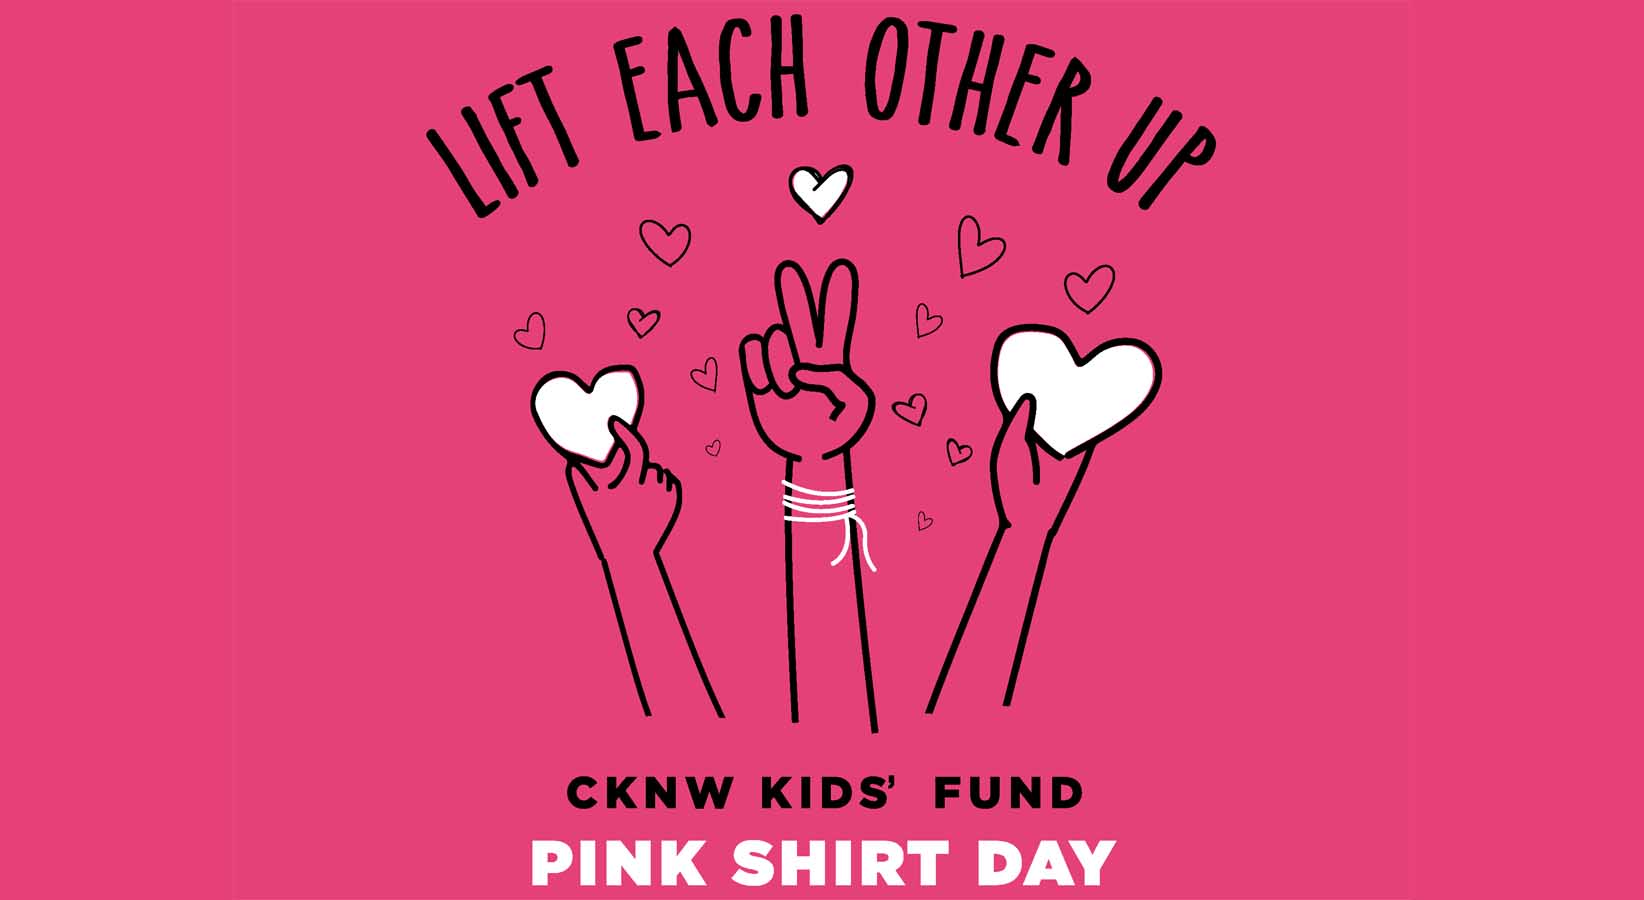 Lift each other up CKNW Kids' fund pink shirt day